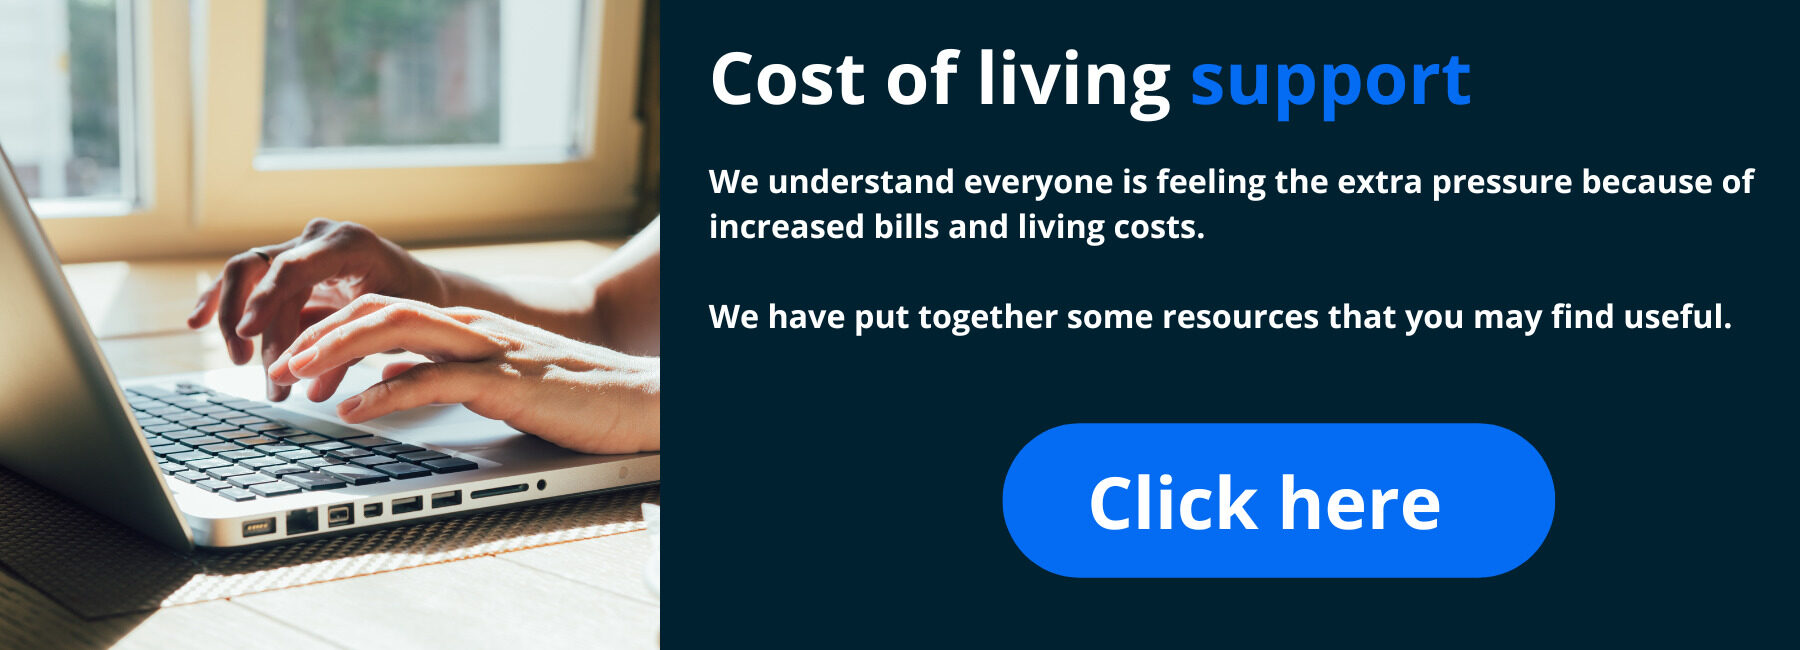 https://www.havebury.com/payments-rent-and-service-charges/cost-of-living-support/